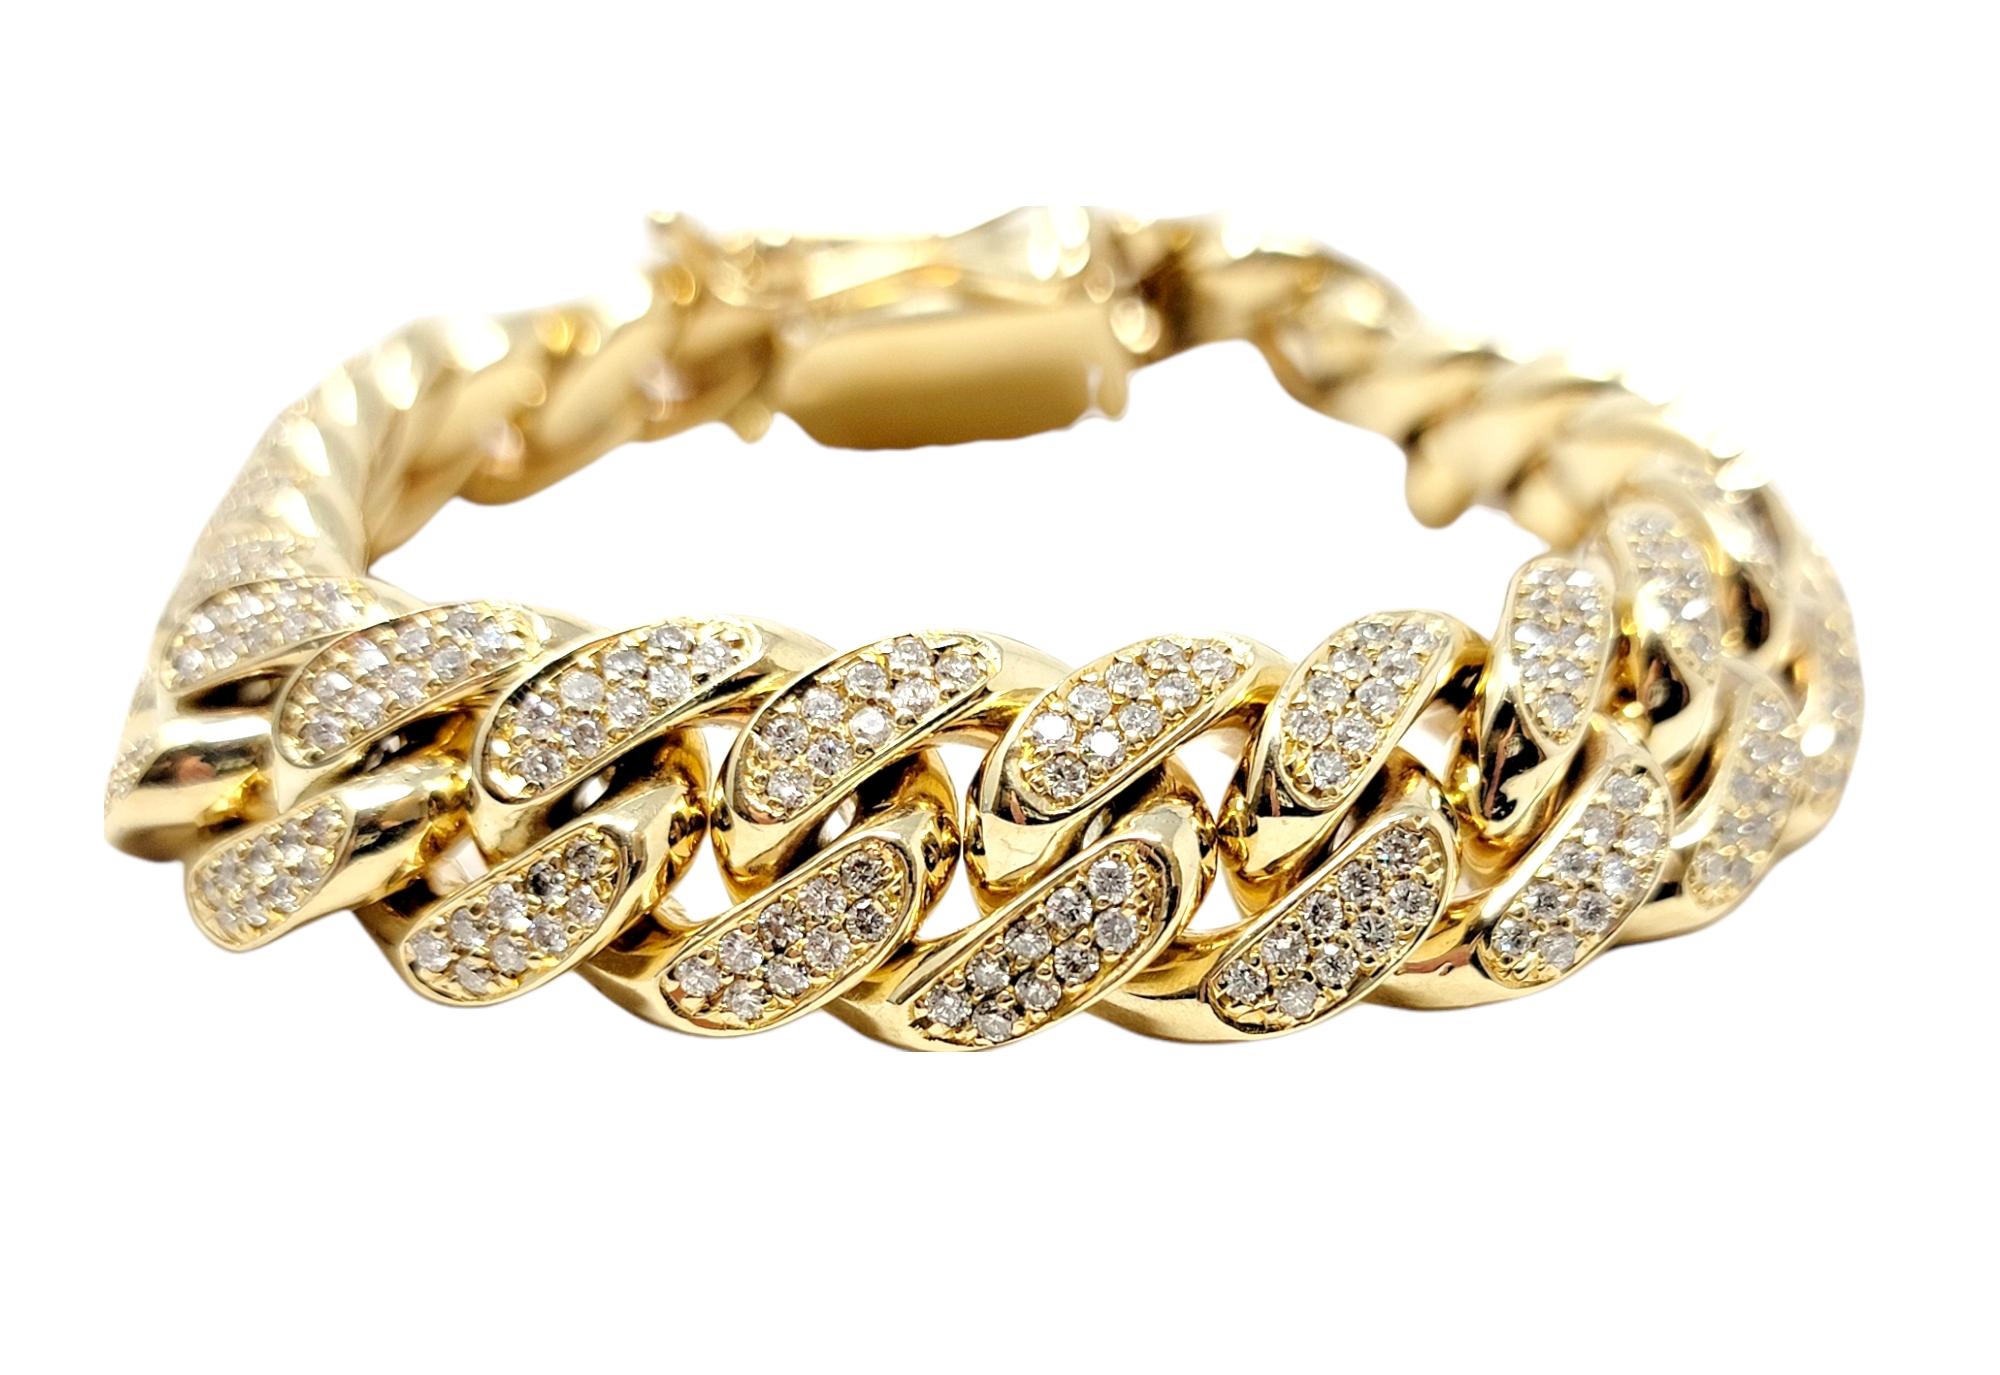 Bold, heavy men's diamond link bracelet. This incredibly handsome piece features a polished 10 karat yellow gold Cuban link design set in a repeating pattern throughout. The solid gold links are chunky in shape and stand out beautifully on the